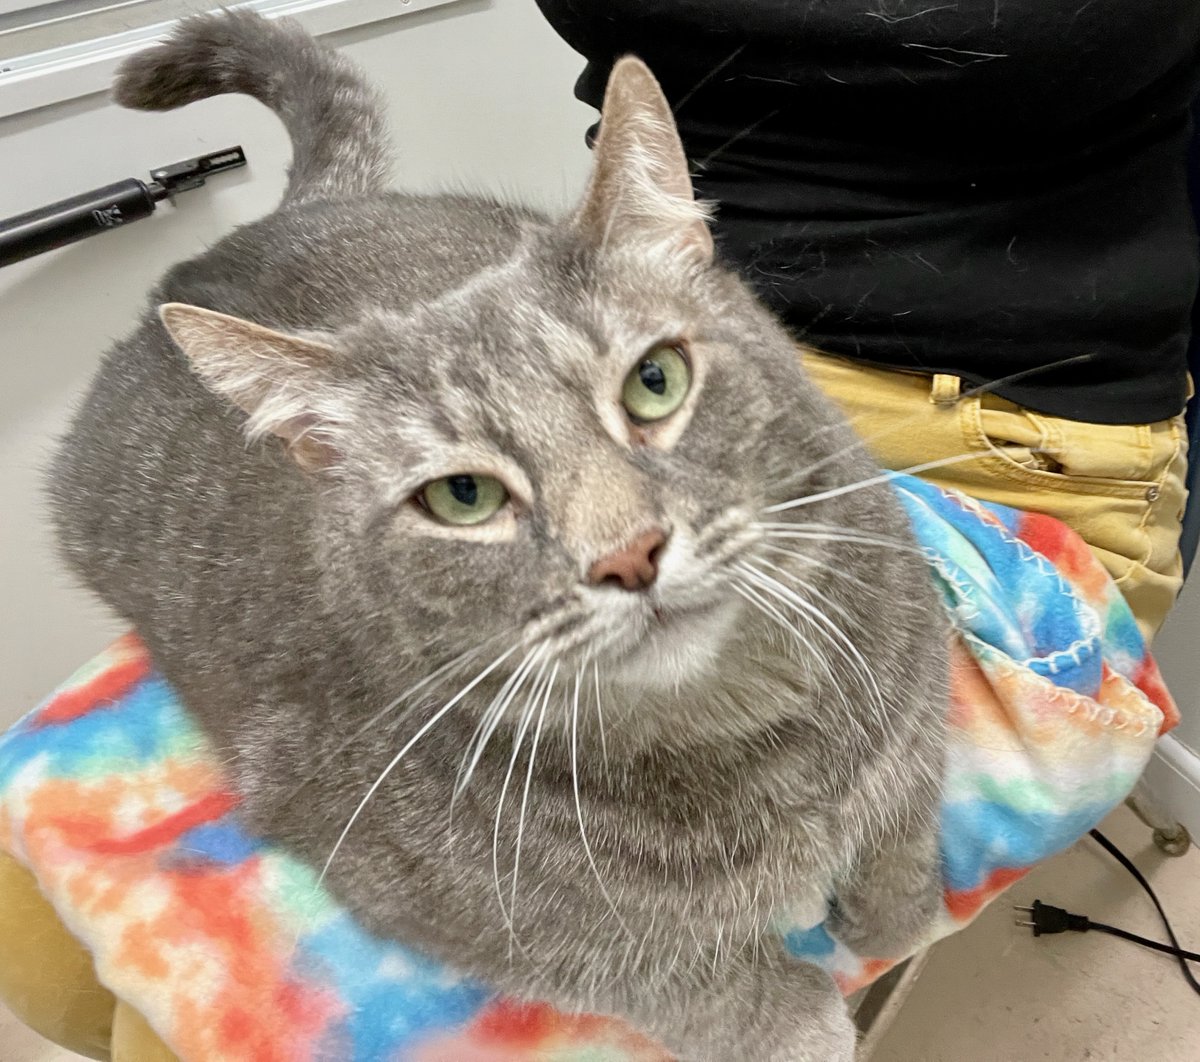 Dorian's been sneezing so he's in isolation due to contagion risk😿This big boy is a good patient. We visit him last, to avoid spreading germs. He imediately jumps on our lap for extra TLC.❤️#cats #pets #va #virginia #wednesday #adoptdontshop #dc #washingtondc #maryland #kitty